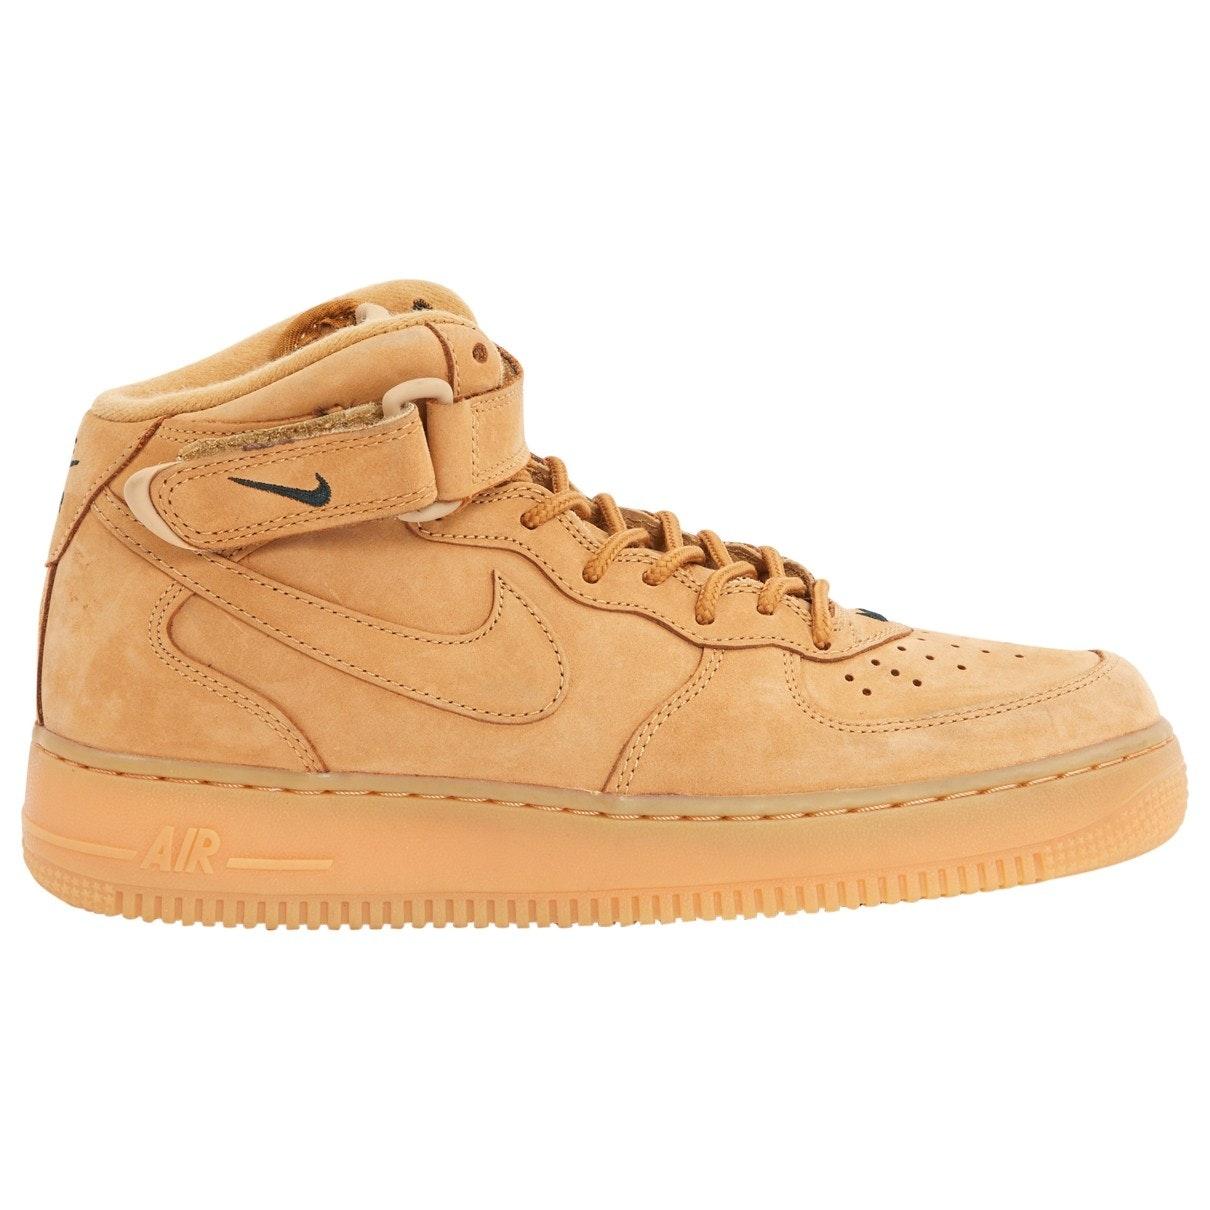 Nike Air Force 1 Camel Suede in Natural 